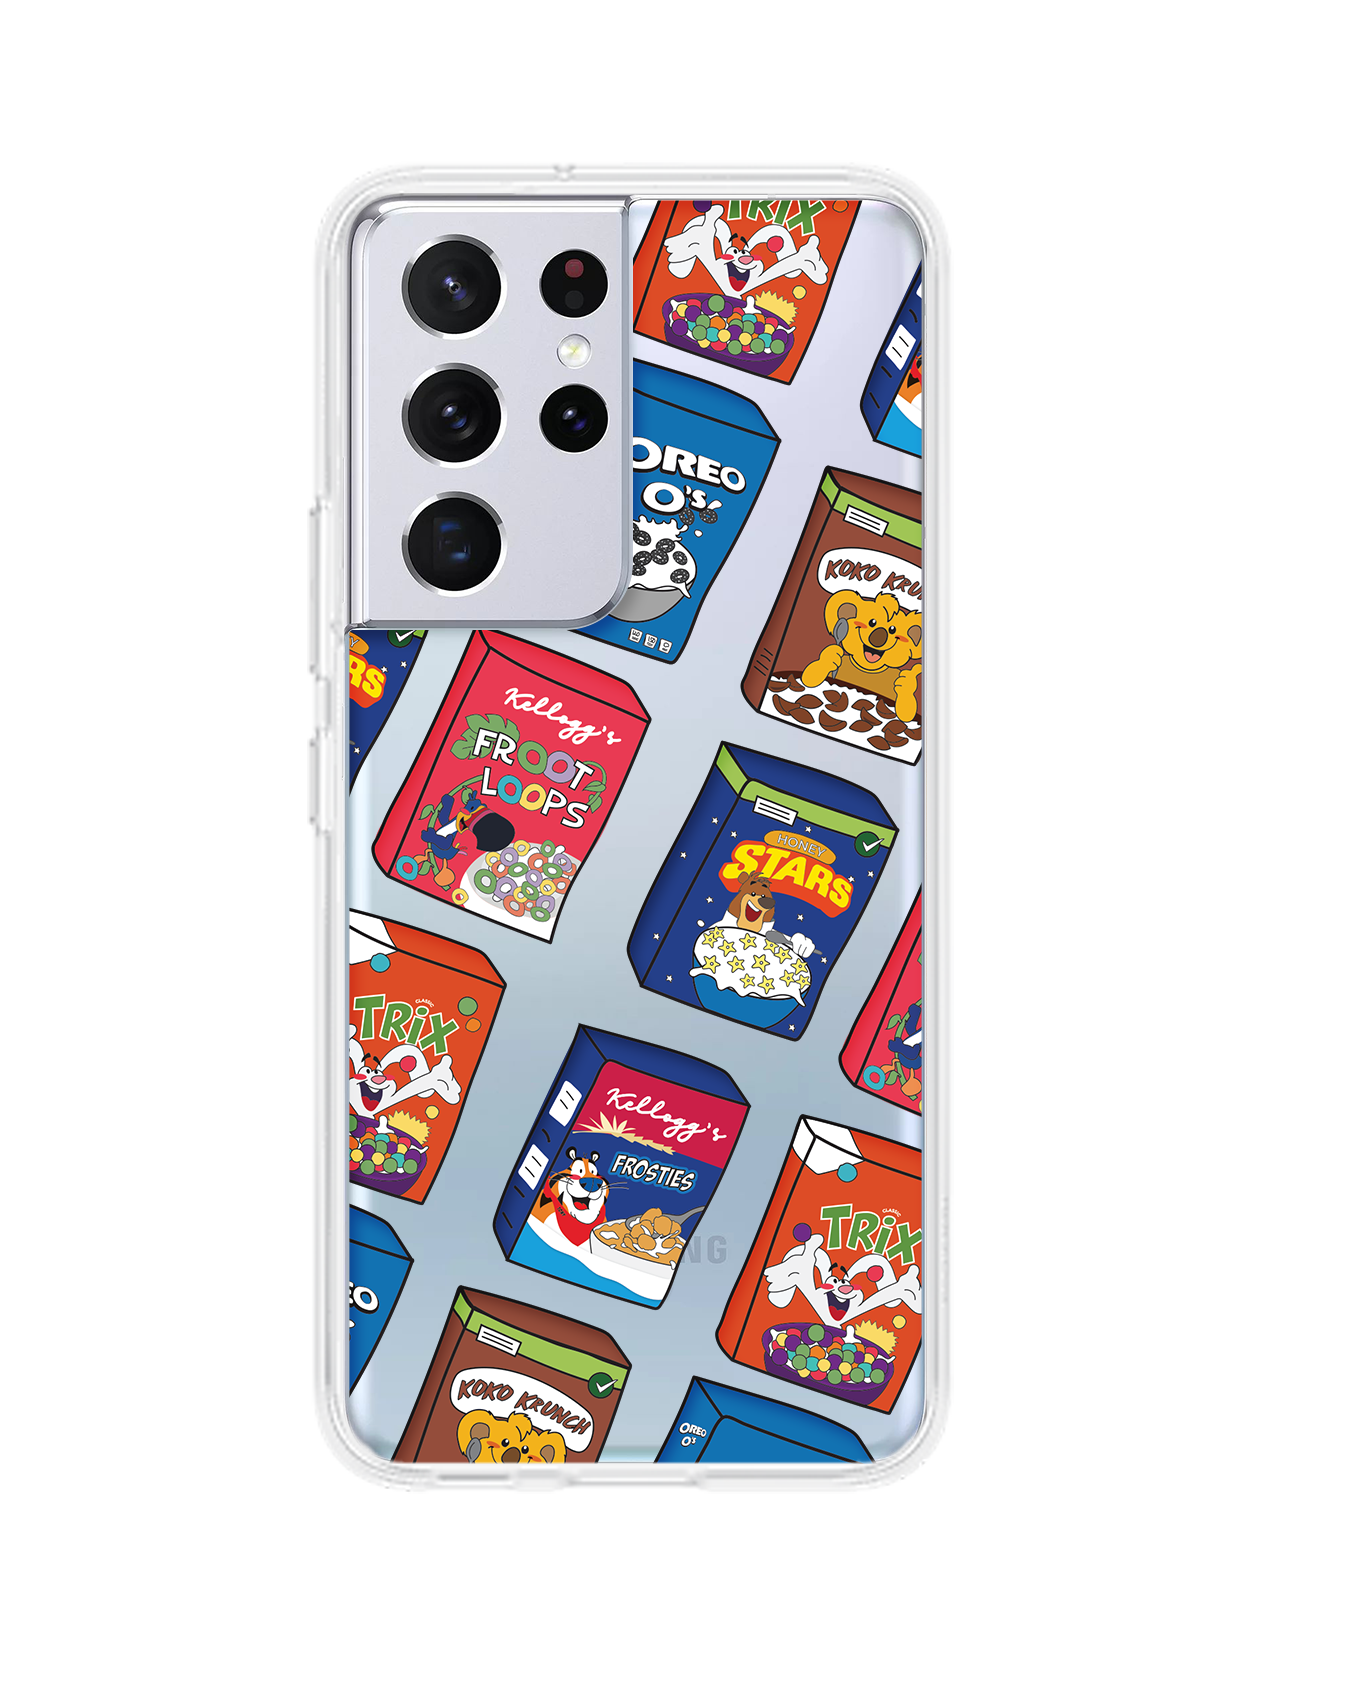 Android Rearguard Hybrid Case - Cereal Boxes 2.0